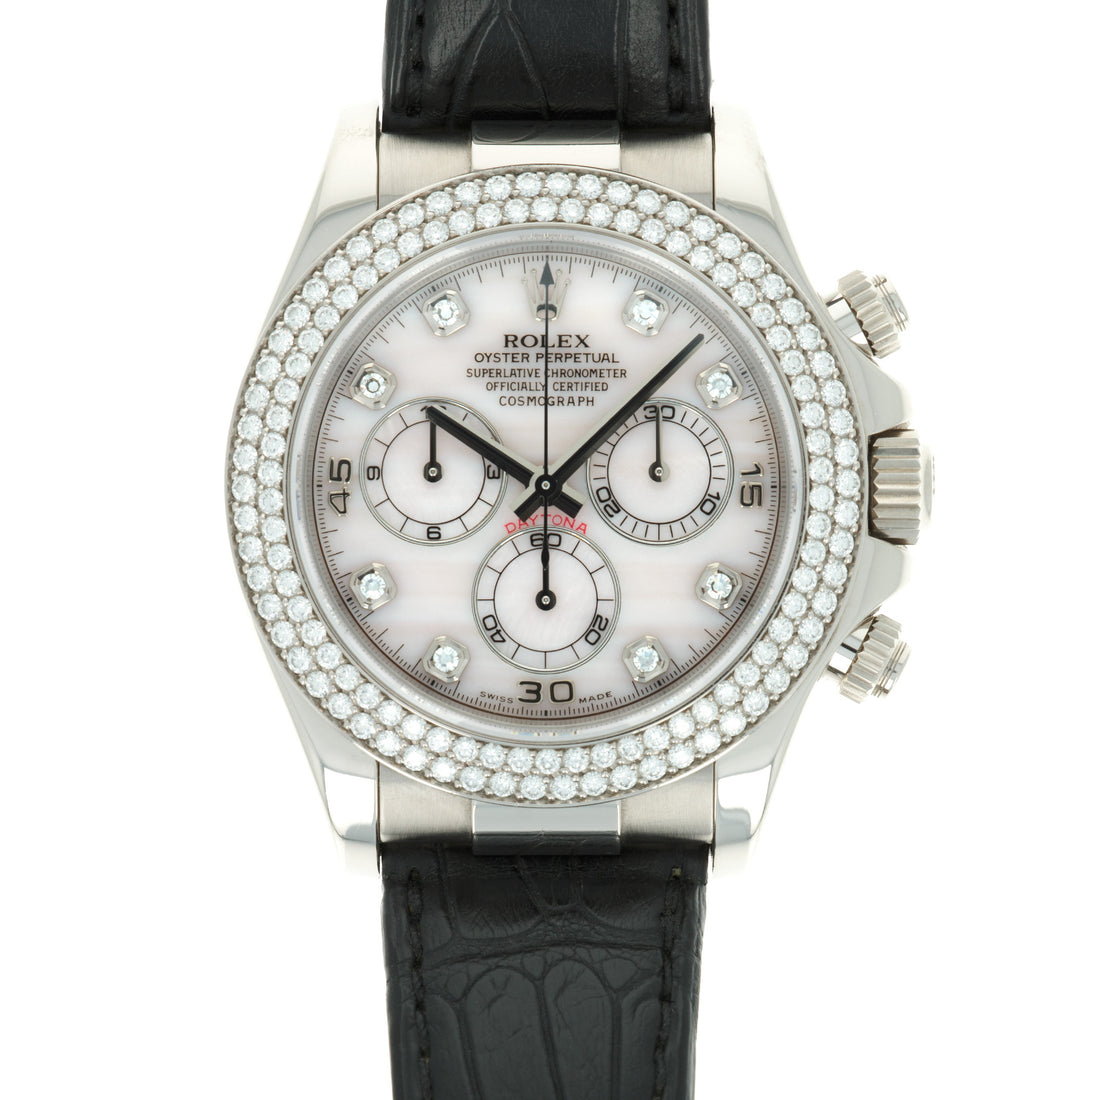 Rolex Daytona White Gold with diamond bezel and Mother of pearl diamond dial Ref. 116589